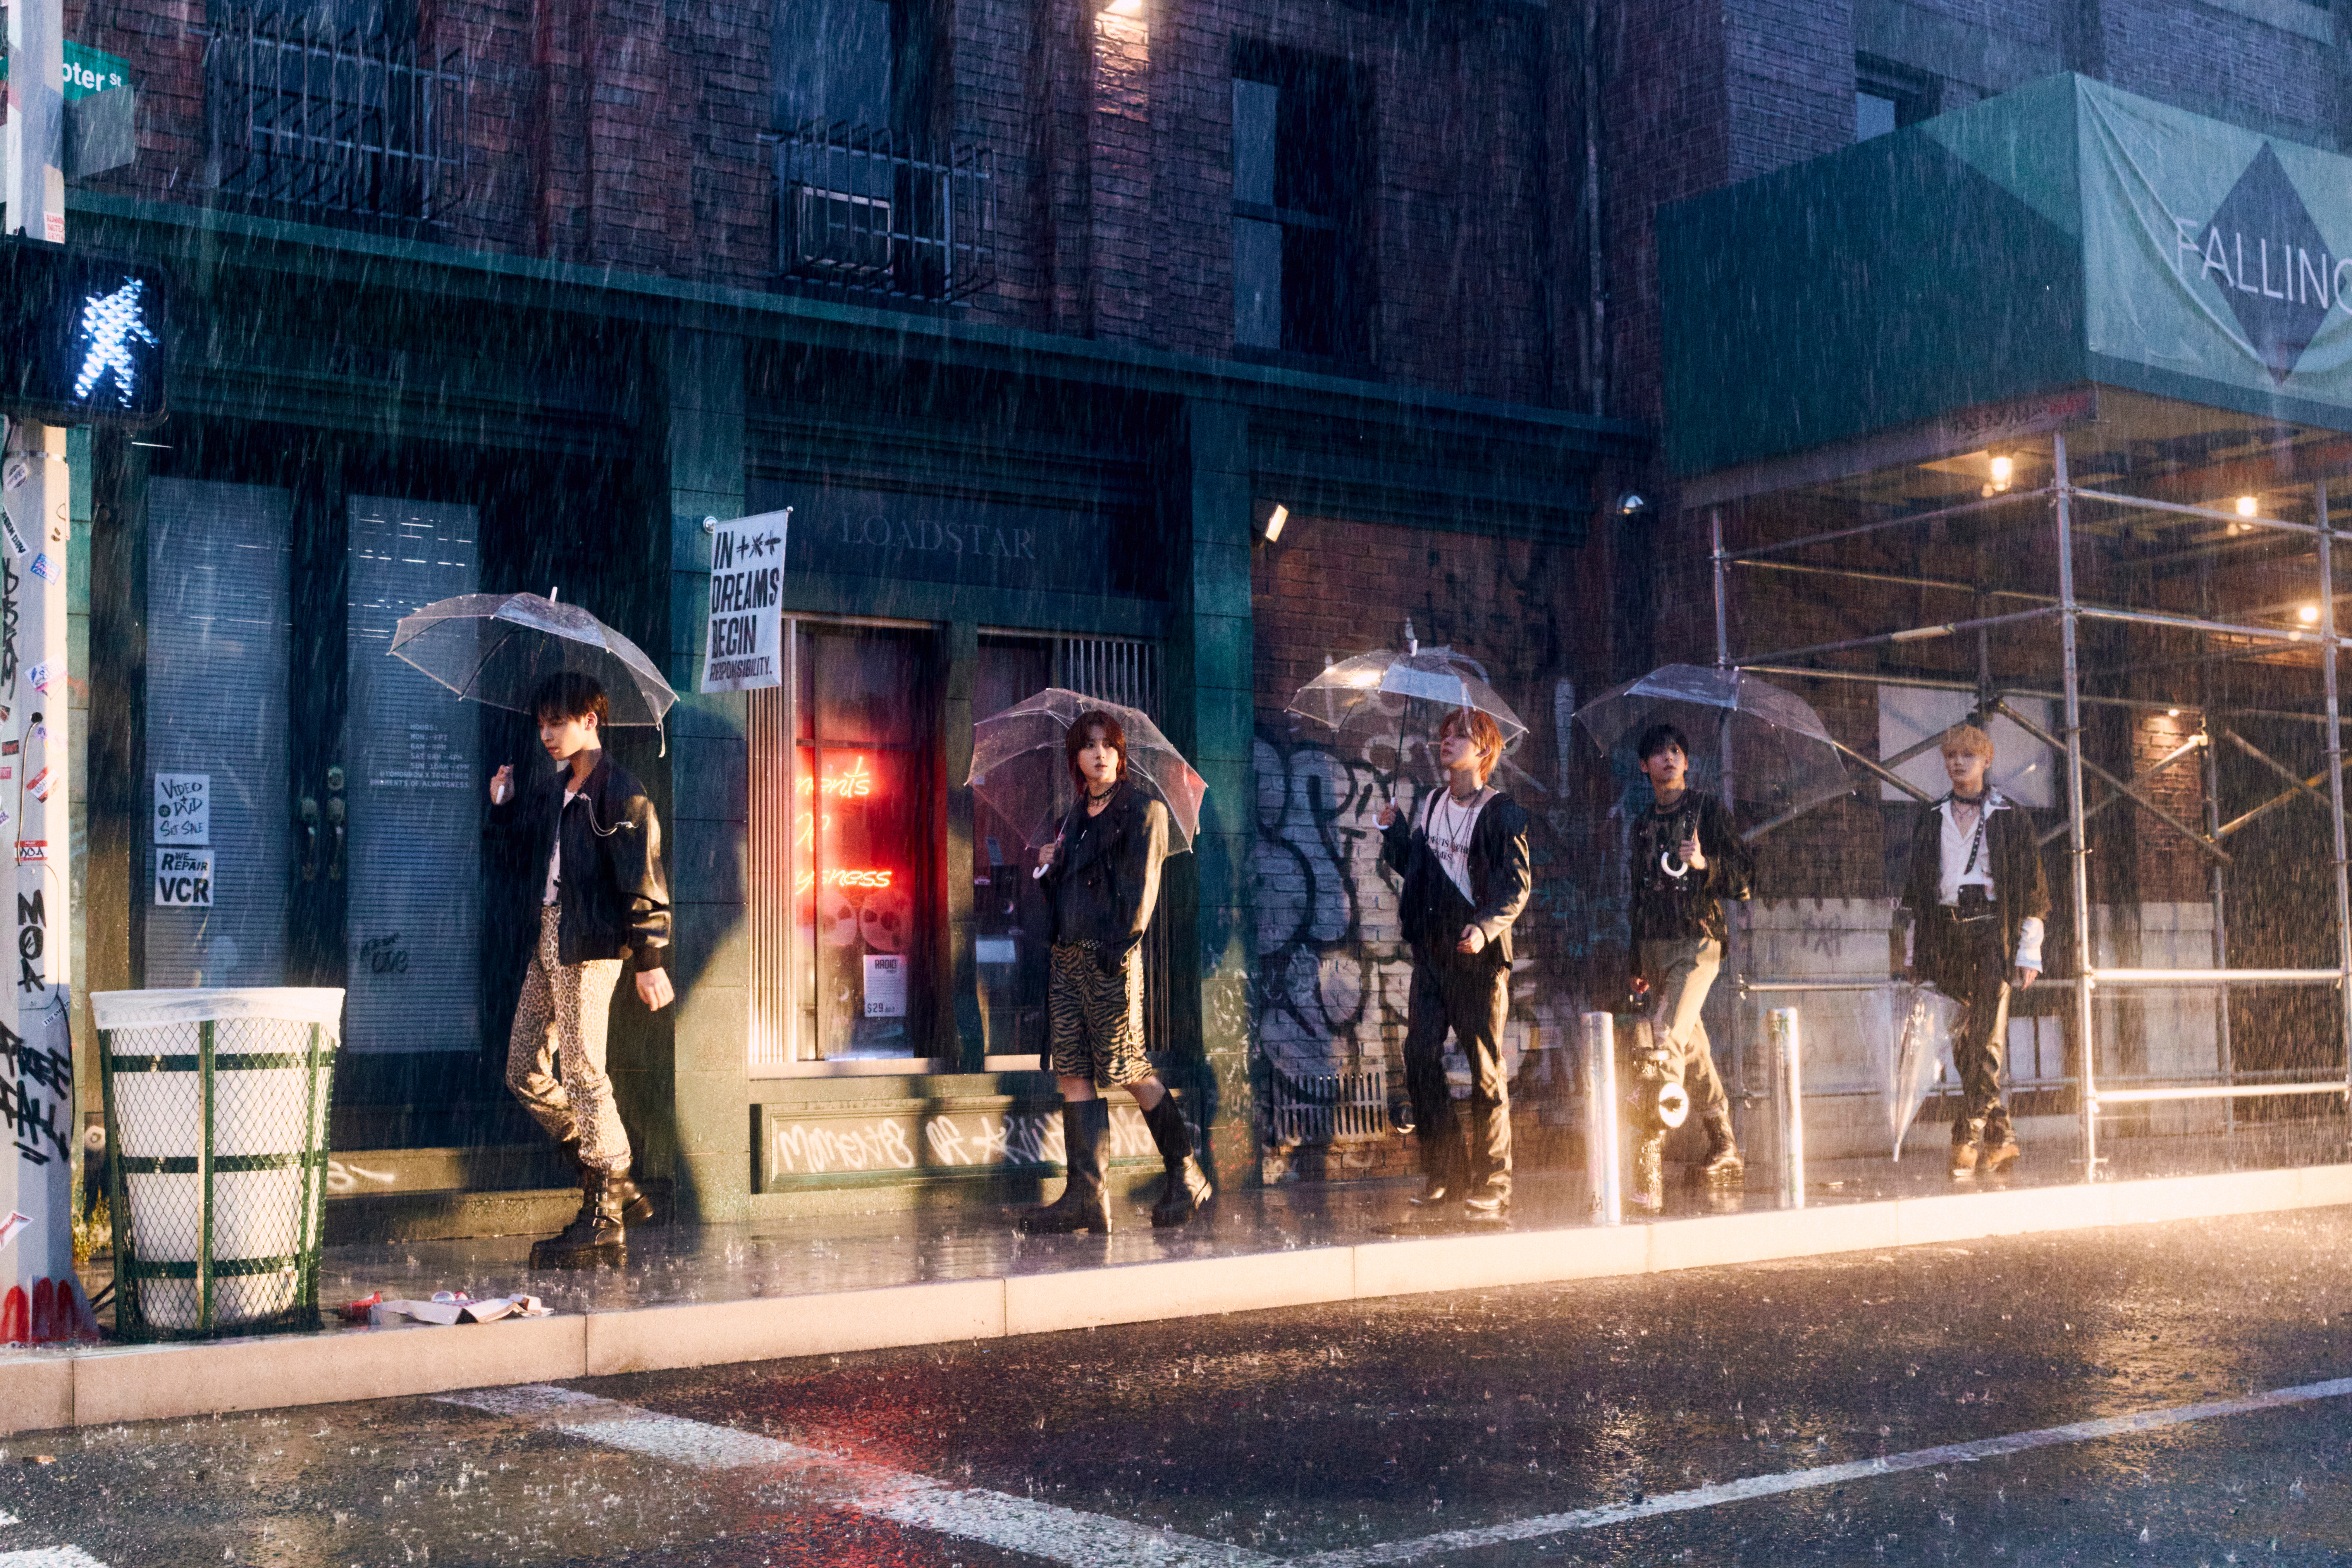 All five TXT members posing with umbrellas in the rain for REALITY concept photos.